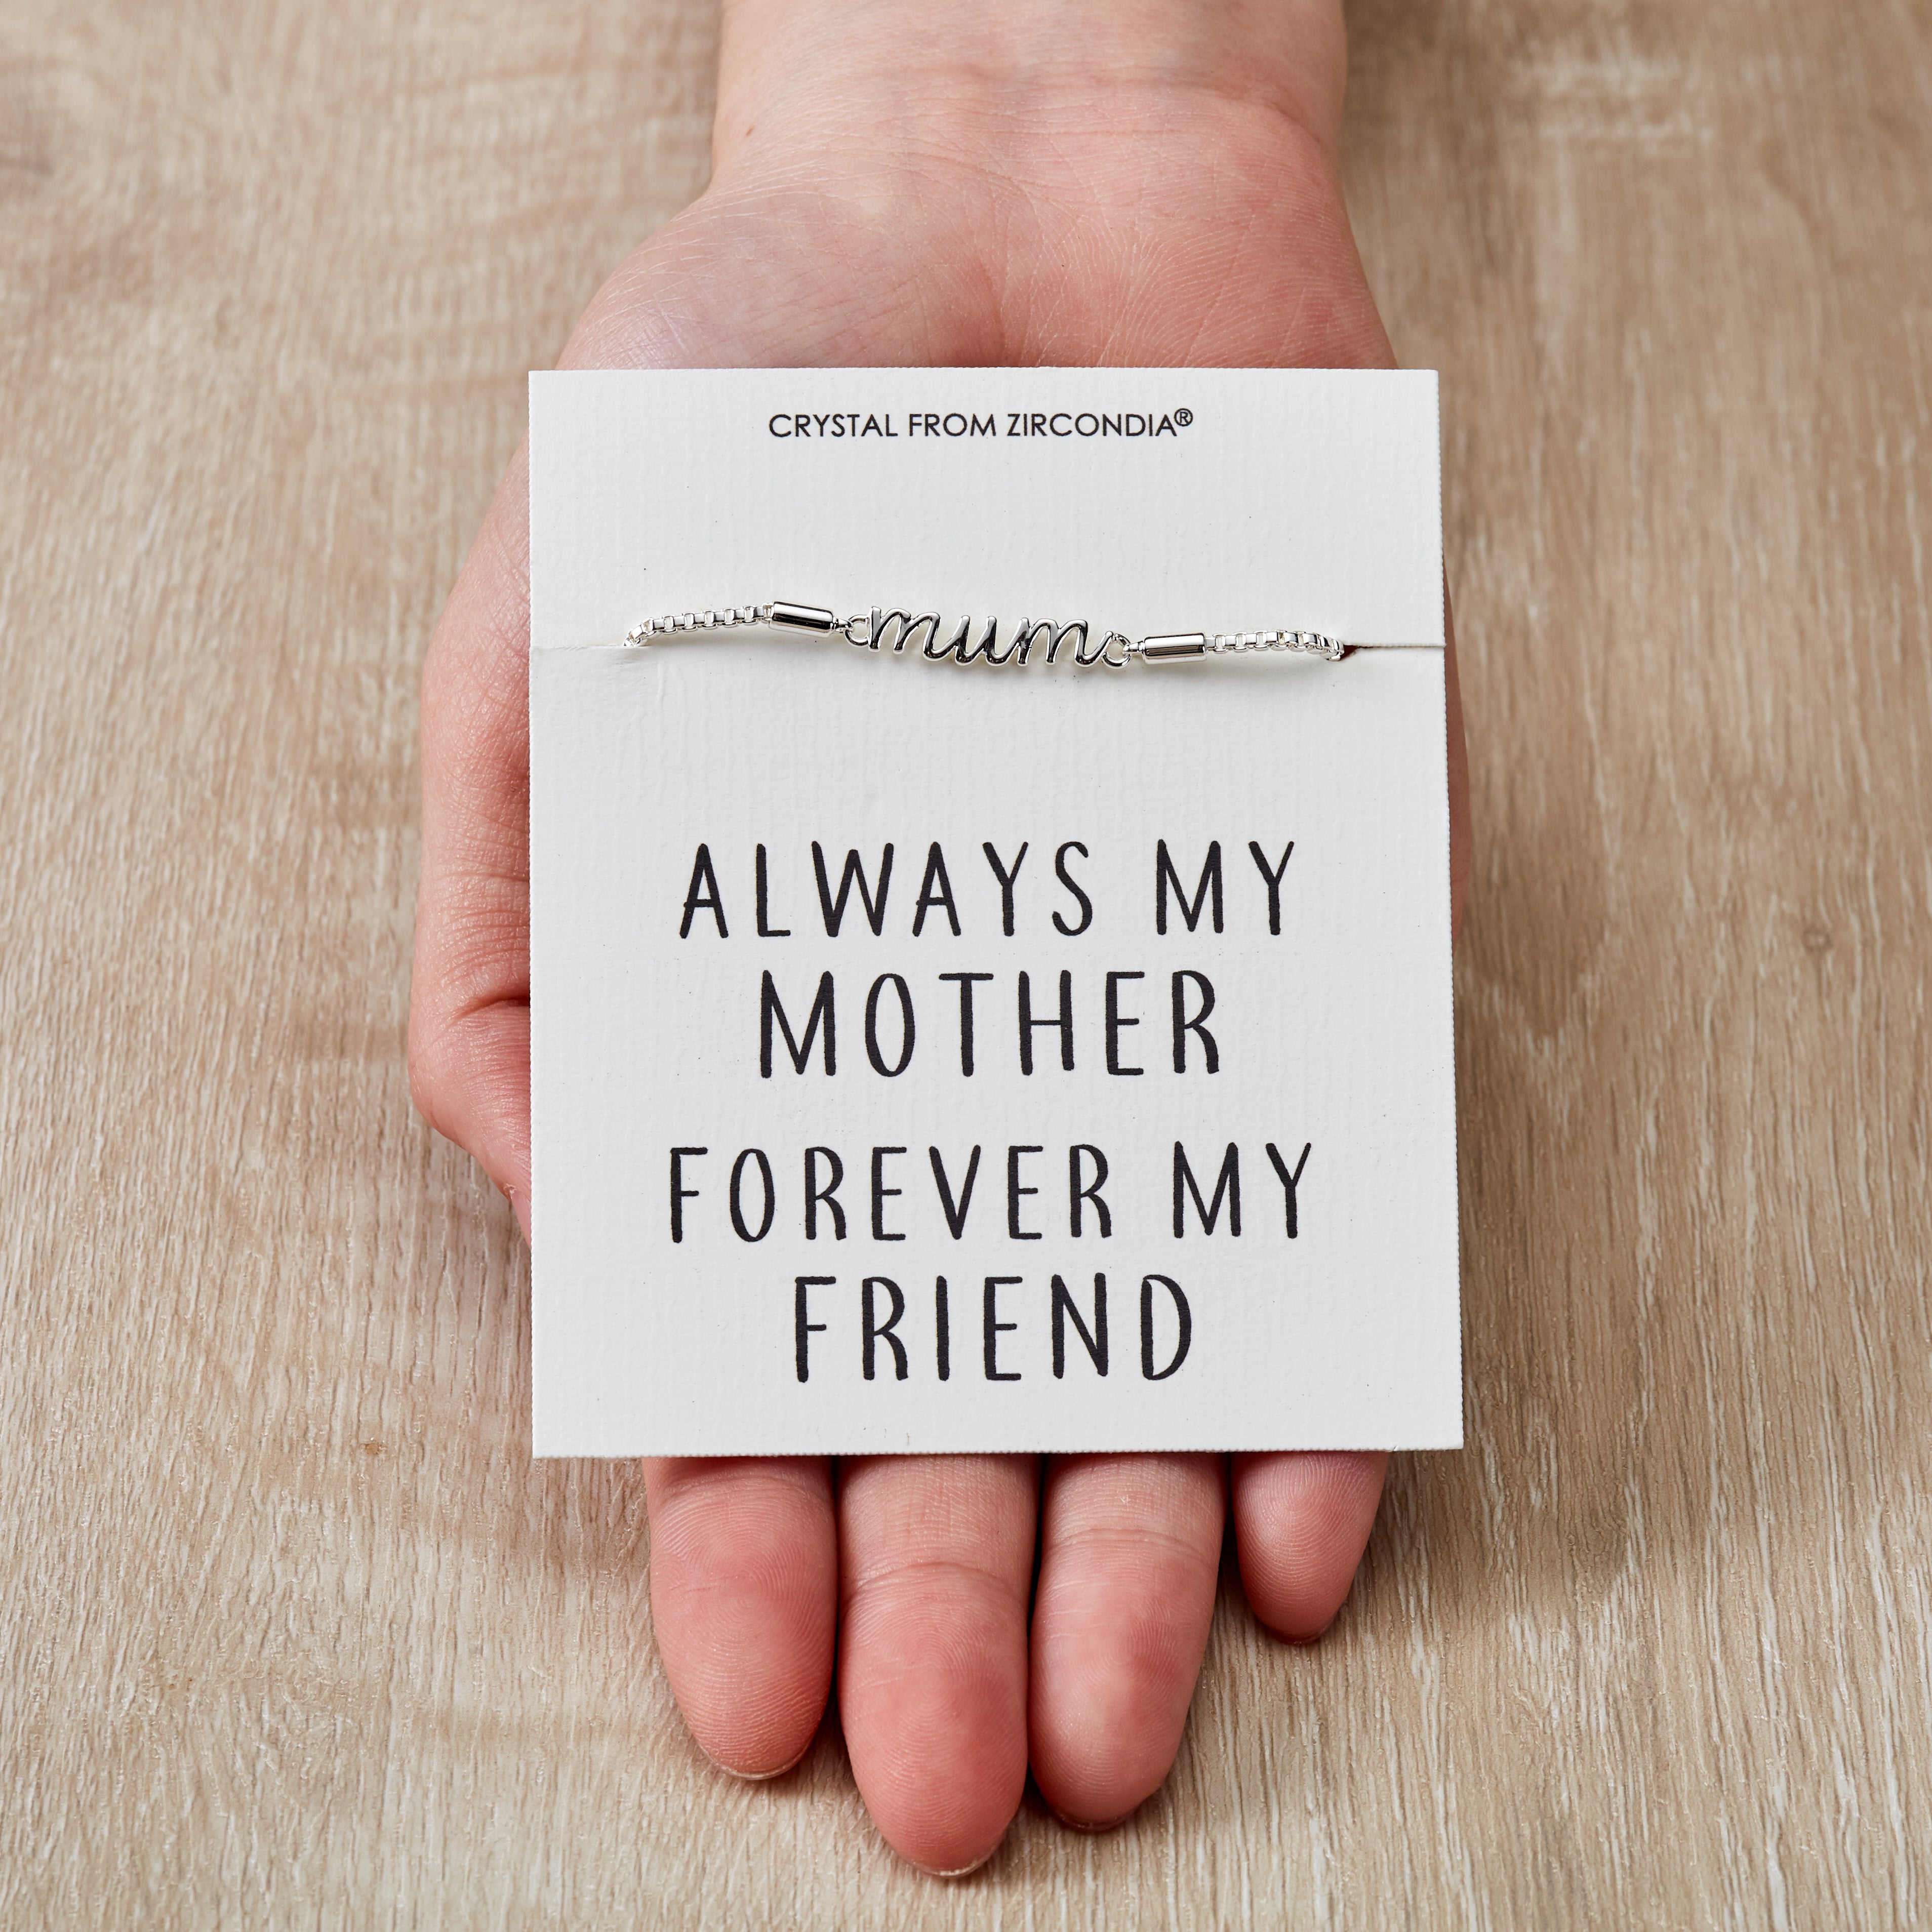 Mum Bracelet with Quote Card Created with Zircondia® Crystals